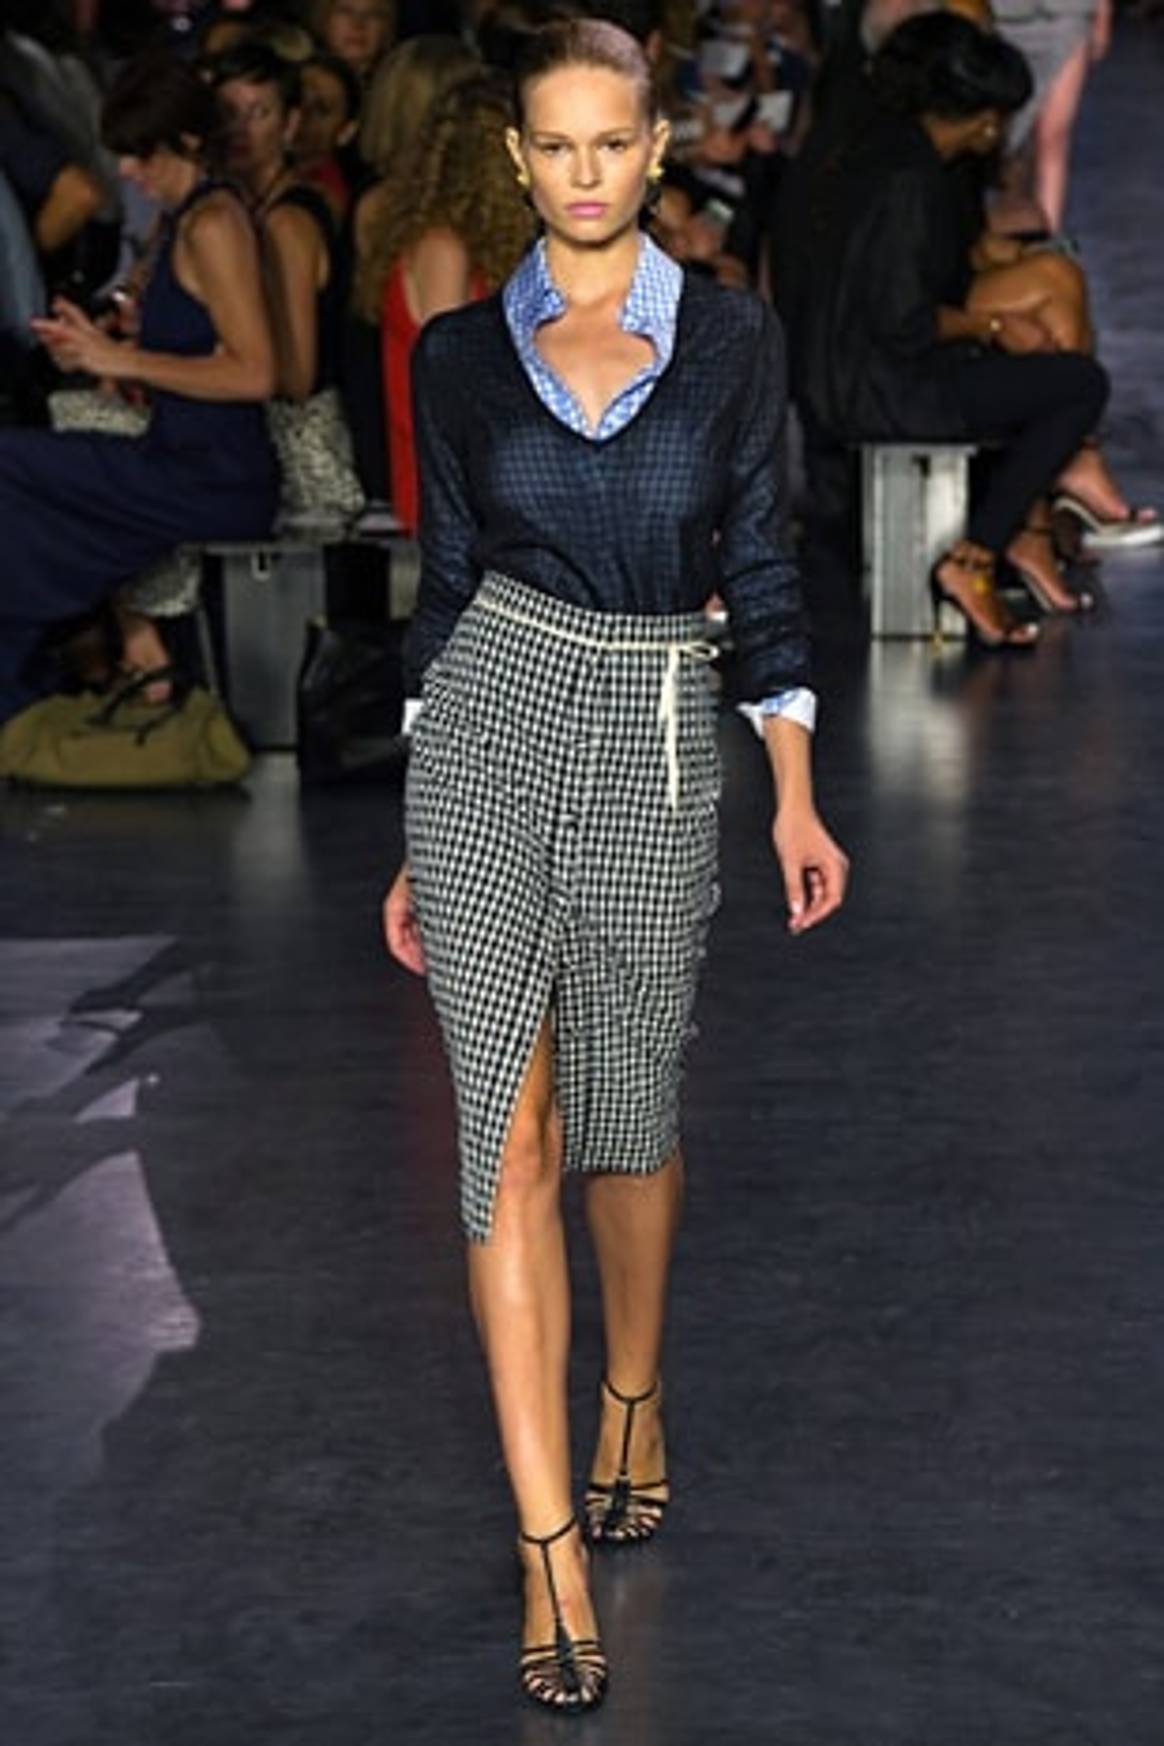 Safari chic and sexy gingham take over the runway in NY